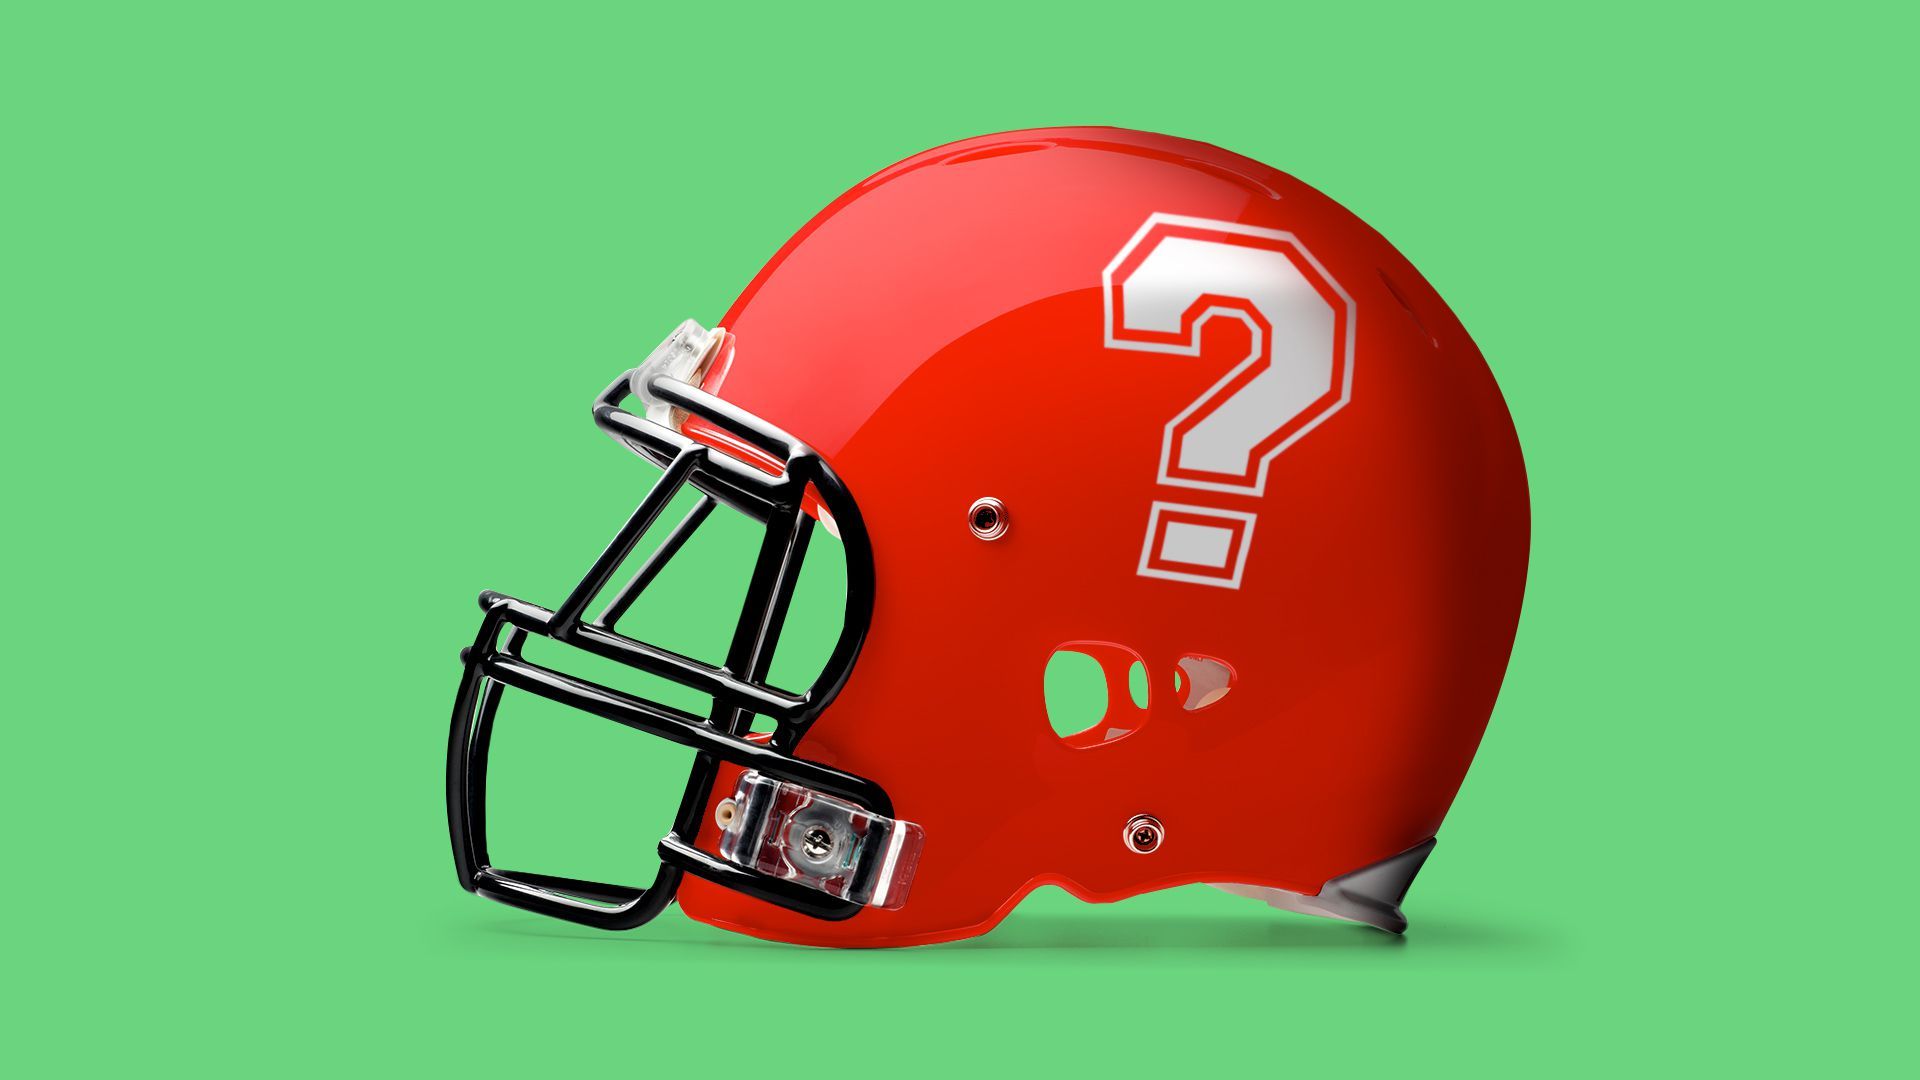 Illustration of a football helmet with a question mark emblem on the side